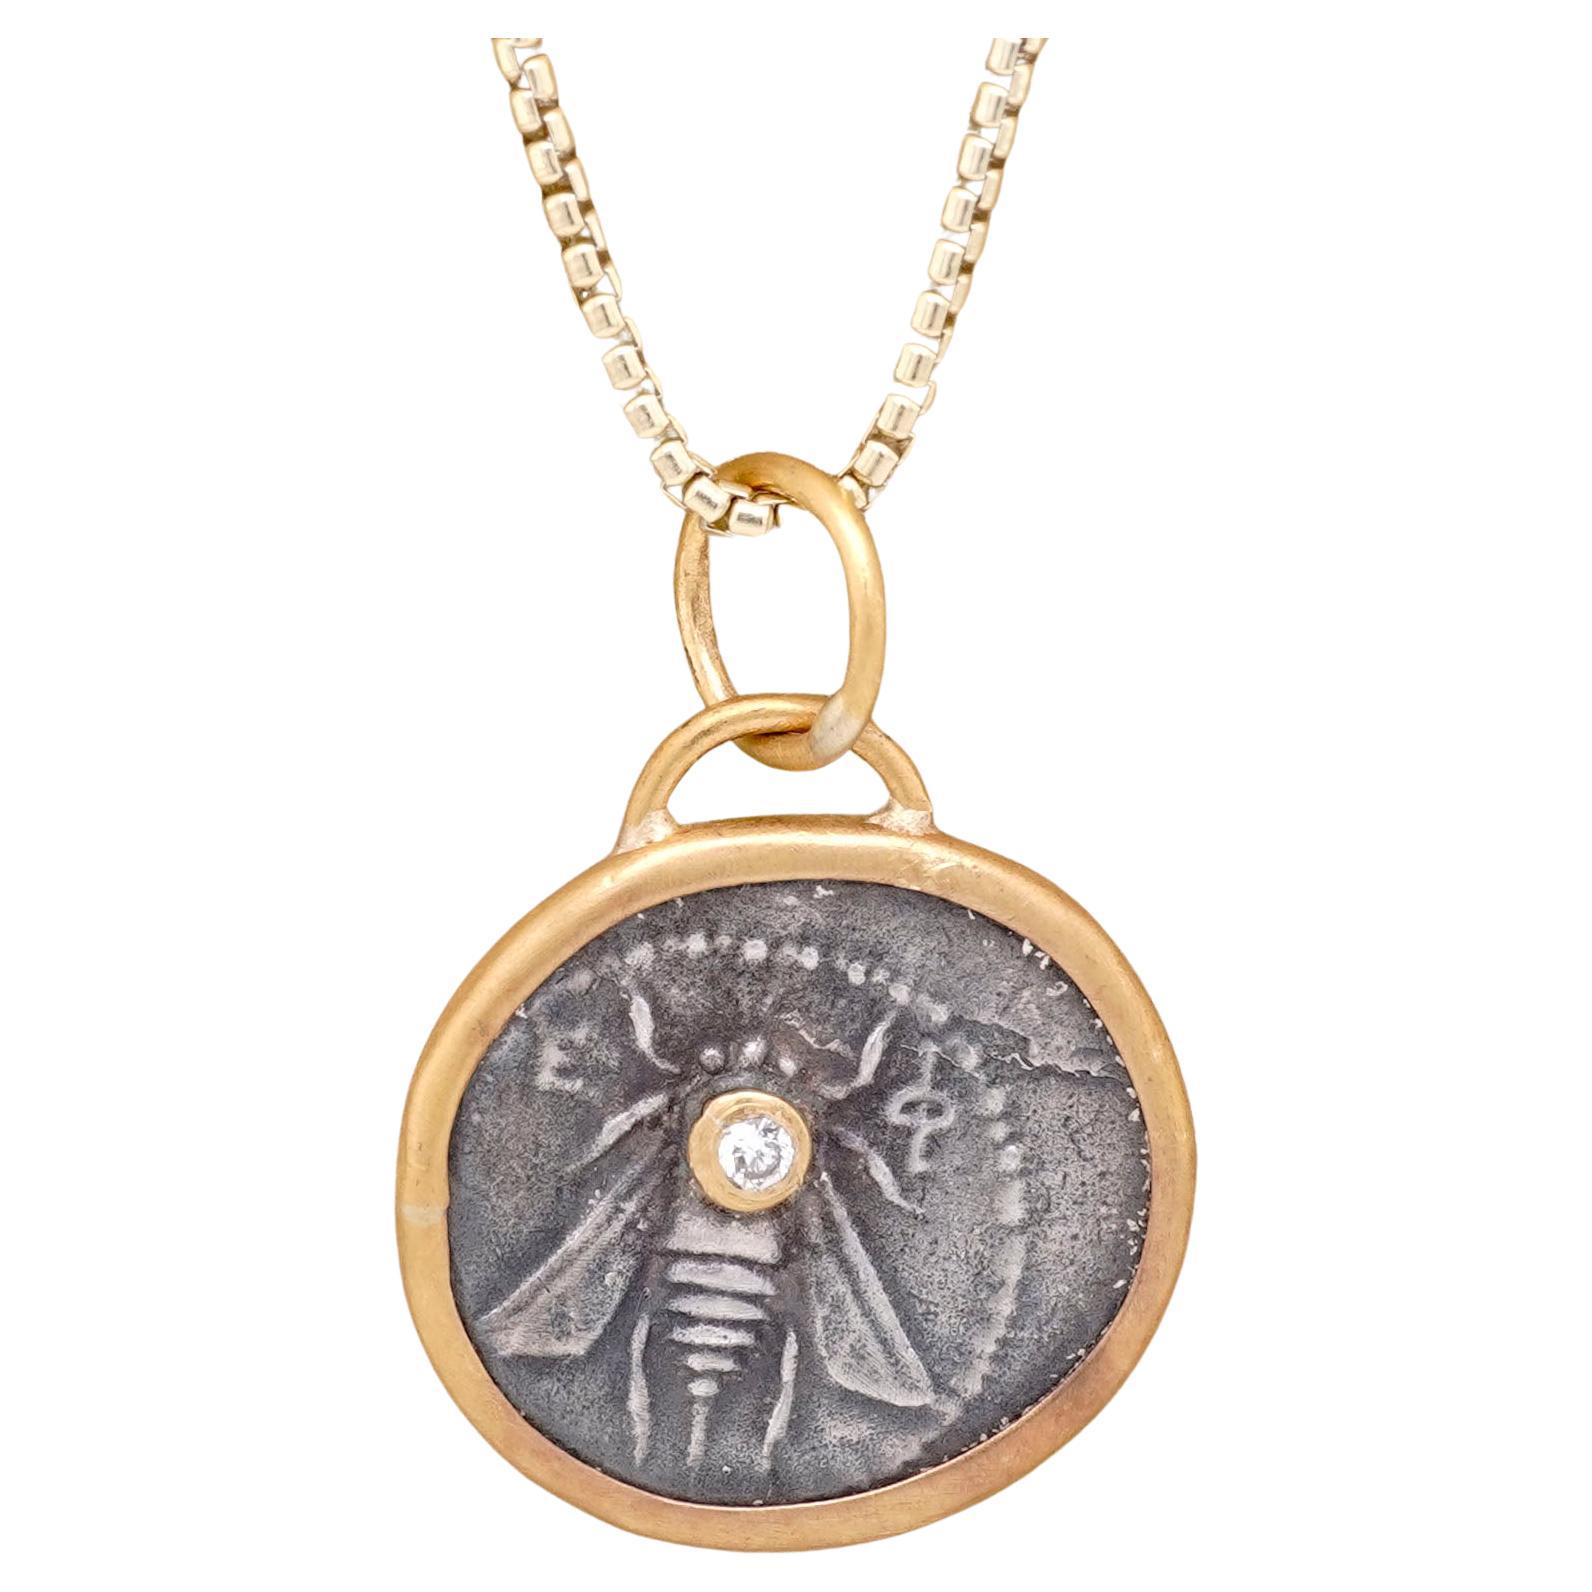 Queen Bee, Ephesus Coin, Tetra Drachm, Pendant Necklace Charm Coin Amulet with Diamond, 24kt Gold and Silver by Prehistoric Works of Istanbul, Turkey. These coin amulets pair well alone or with other coin pendants or with miniature pendants.